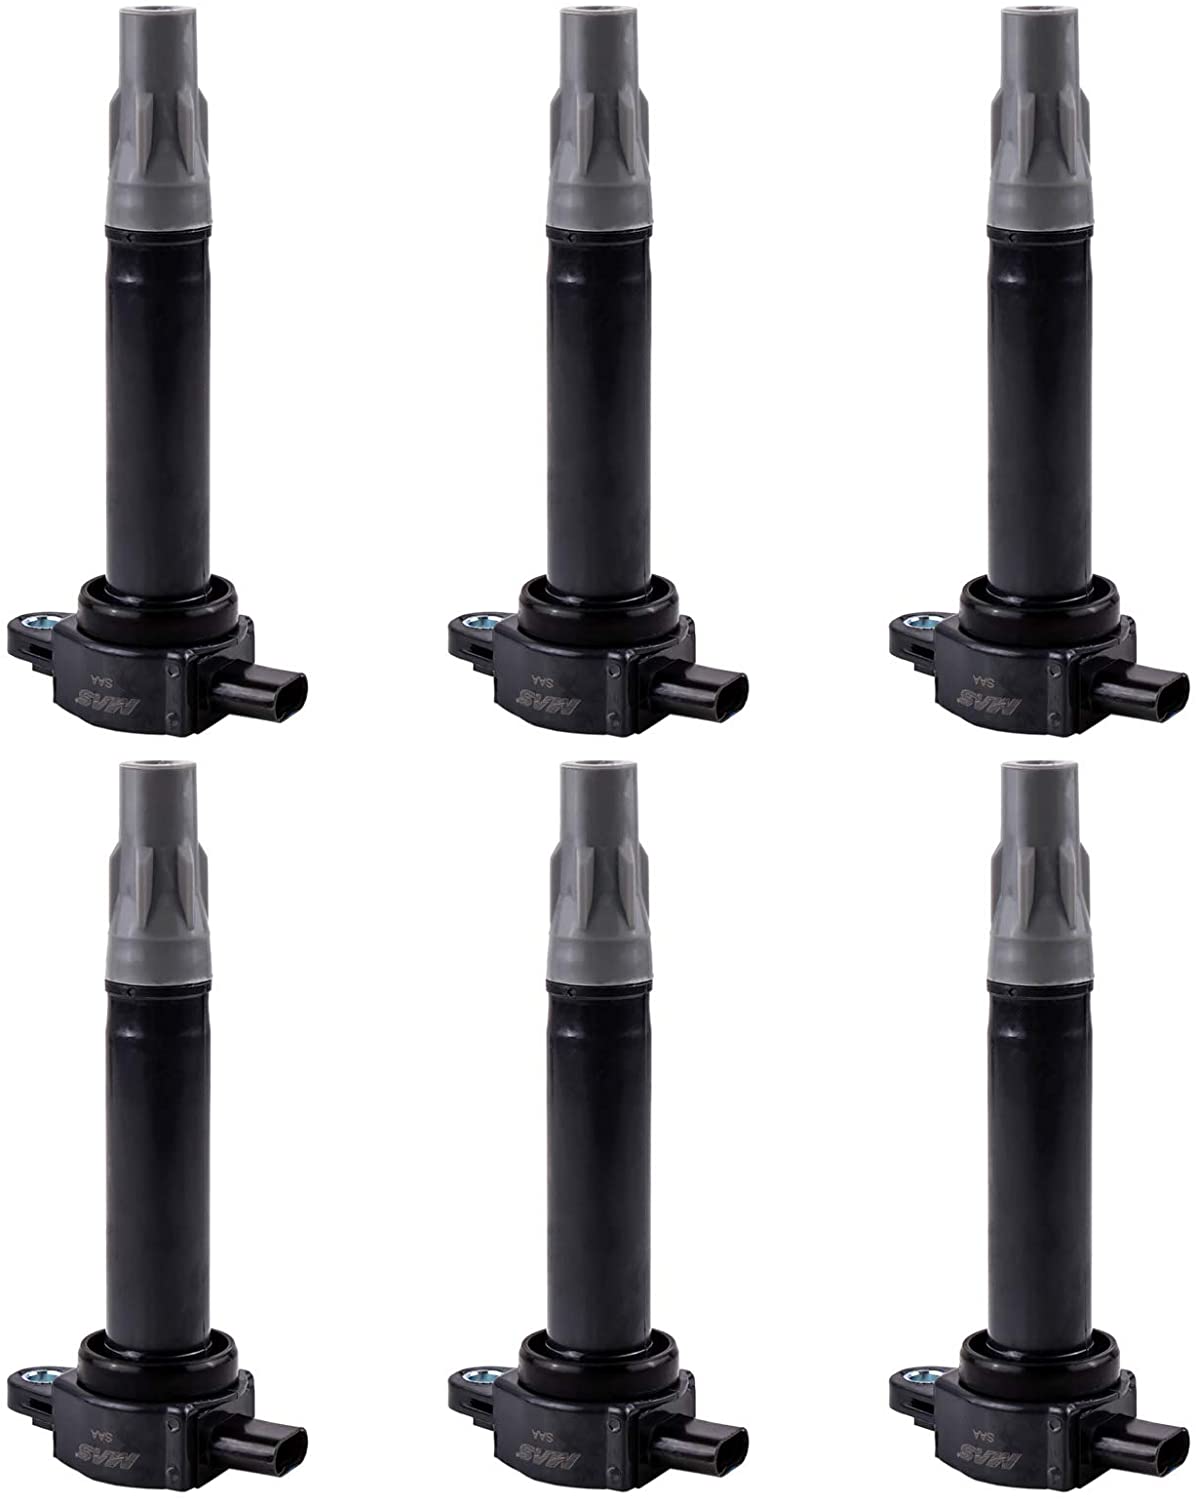 MAS Ignition Coil Pack of 6 Replacement for Dodge Charger Nitro Chrysler Volkswagen 2.5L 3.7L 3.5L V6 UF502 UF-609 C1522